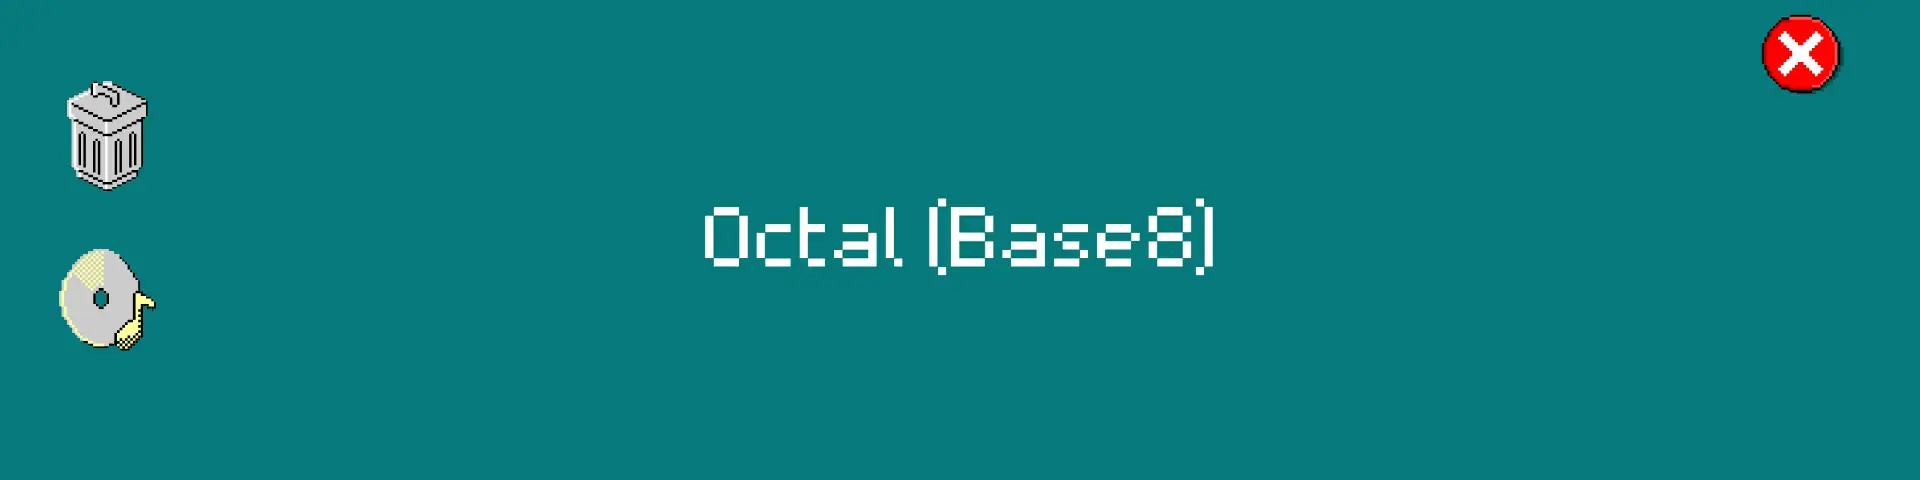 In this article we will go through the most basic topics of Octal (aka Base8): what is octal, how it works and how to convert text to Base8 format.